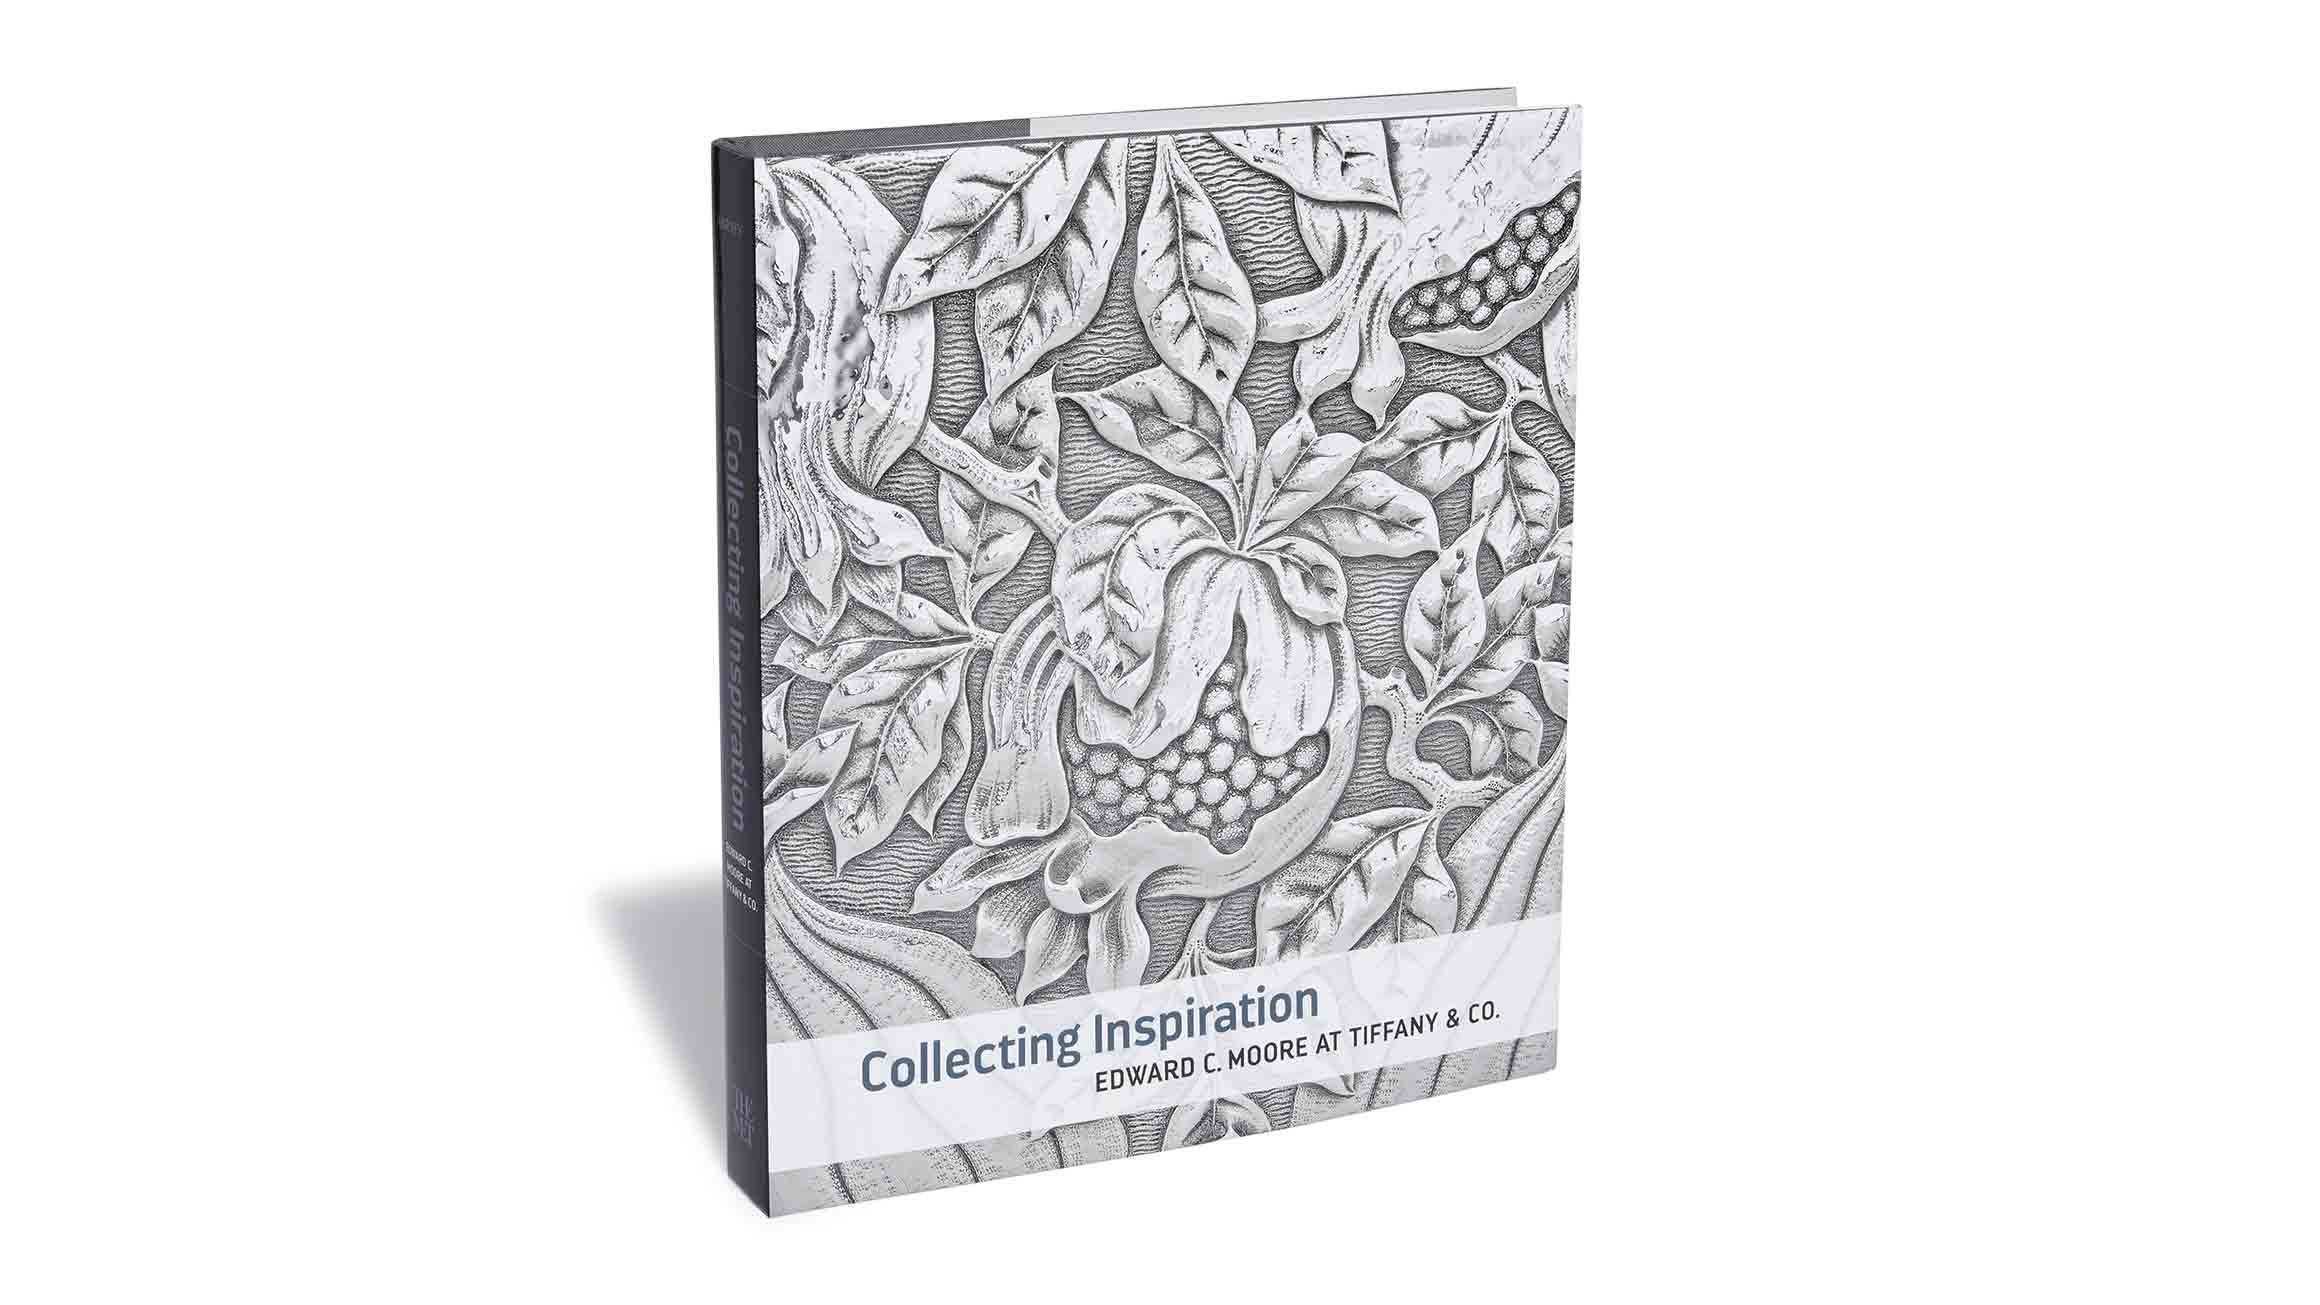 The cover of Collecting Inspiration: Edward C. Moore at Tiffany & Co. A detail of floral embellishments engraved in silver on an object from the Edward C. Moore collection is depicted on the cover.